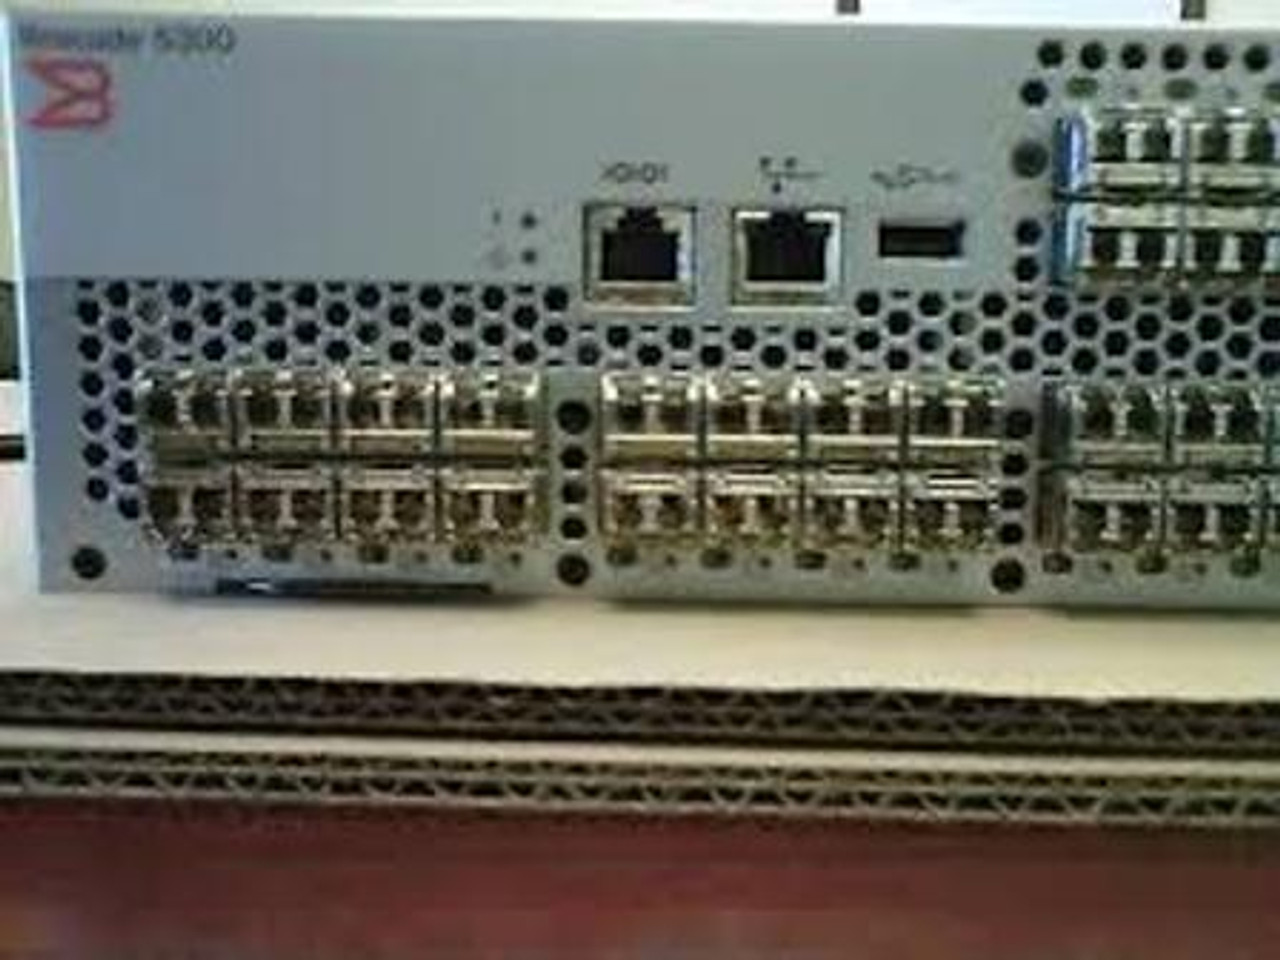 BR-5340-0008-A - Brocade 5300 Switch - 80 Ports - 8Gbps